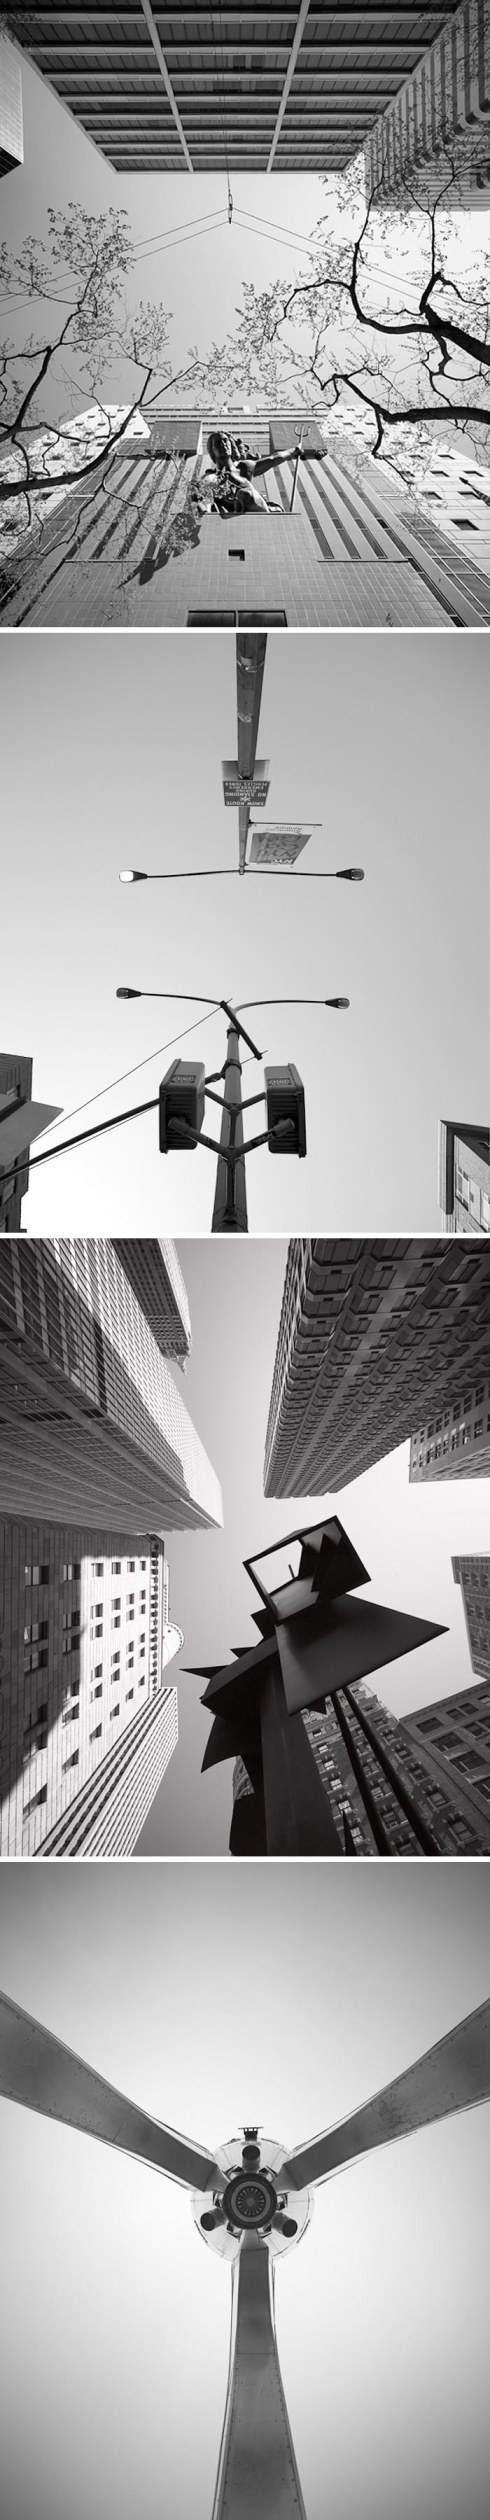 Cameron Neilson, 379 Broome Street, Straight Up, Contemporary Architectural Photography